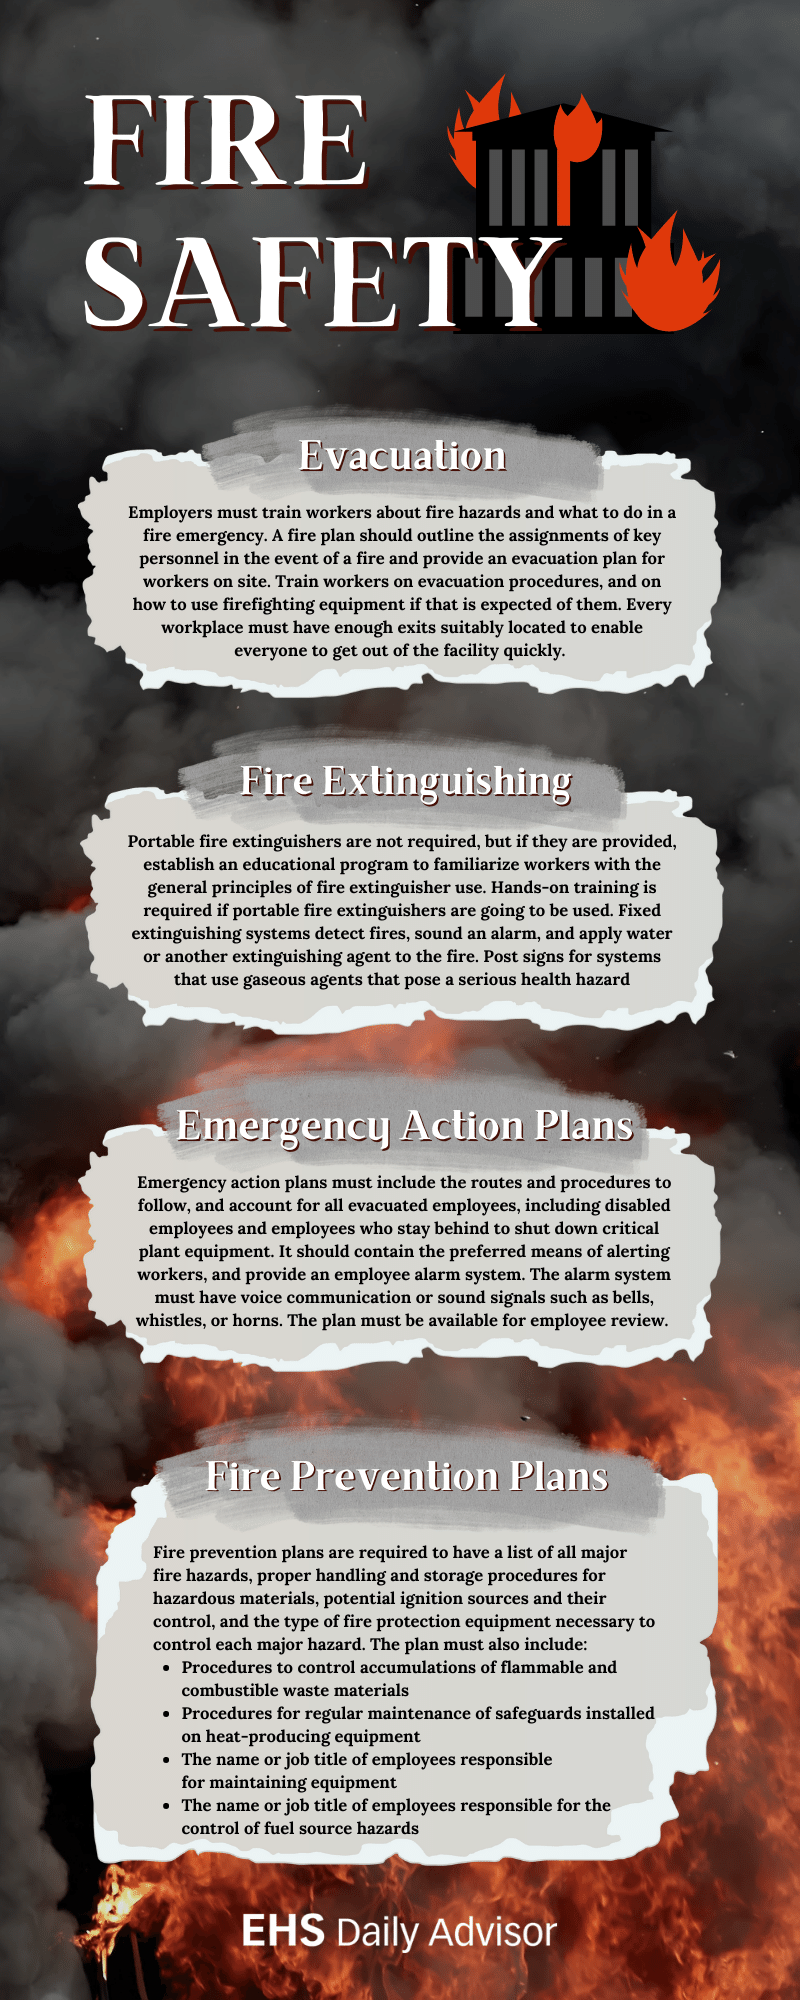 Fire Safety Infographic 